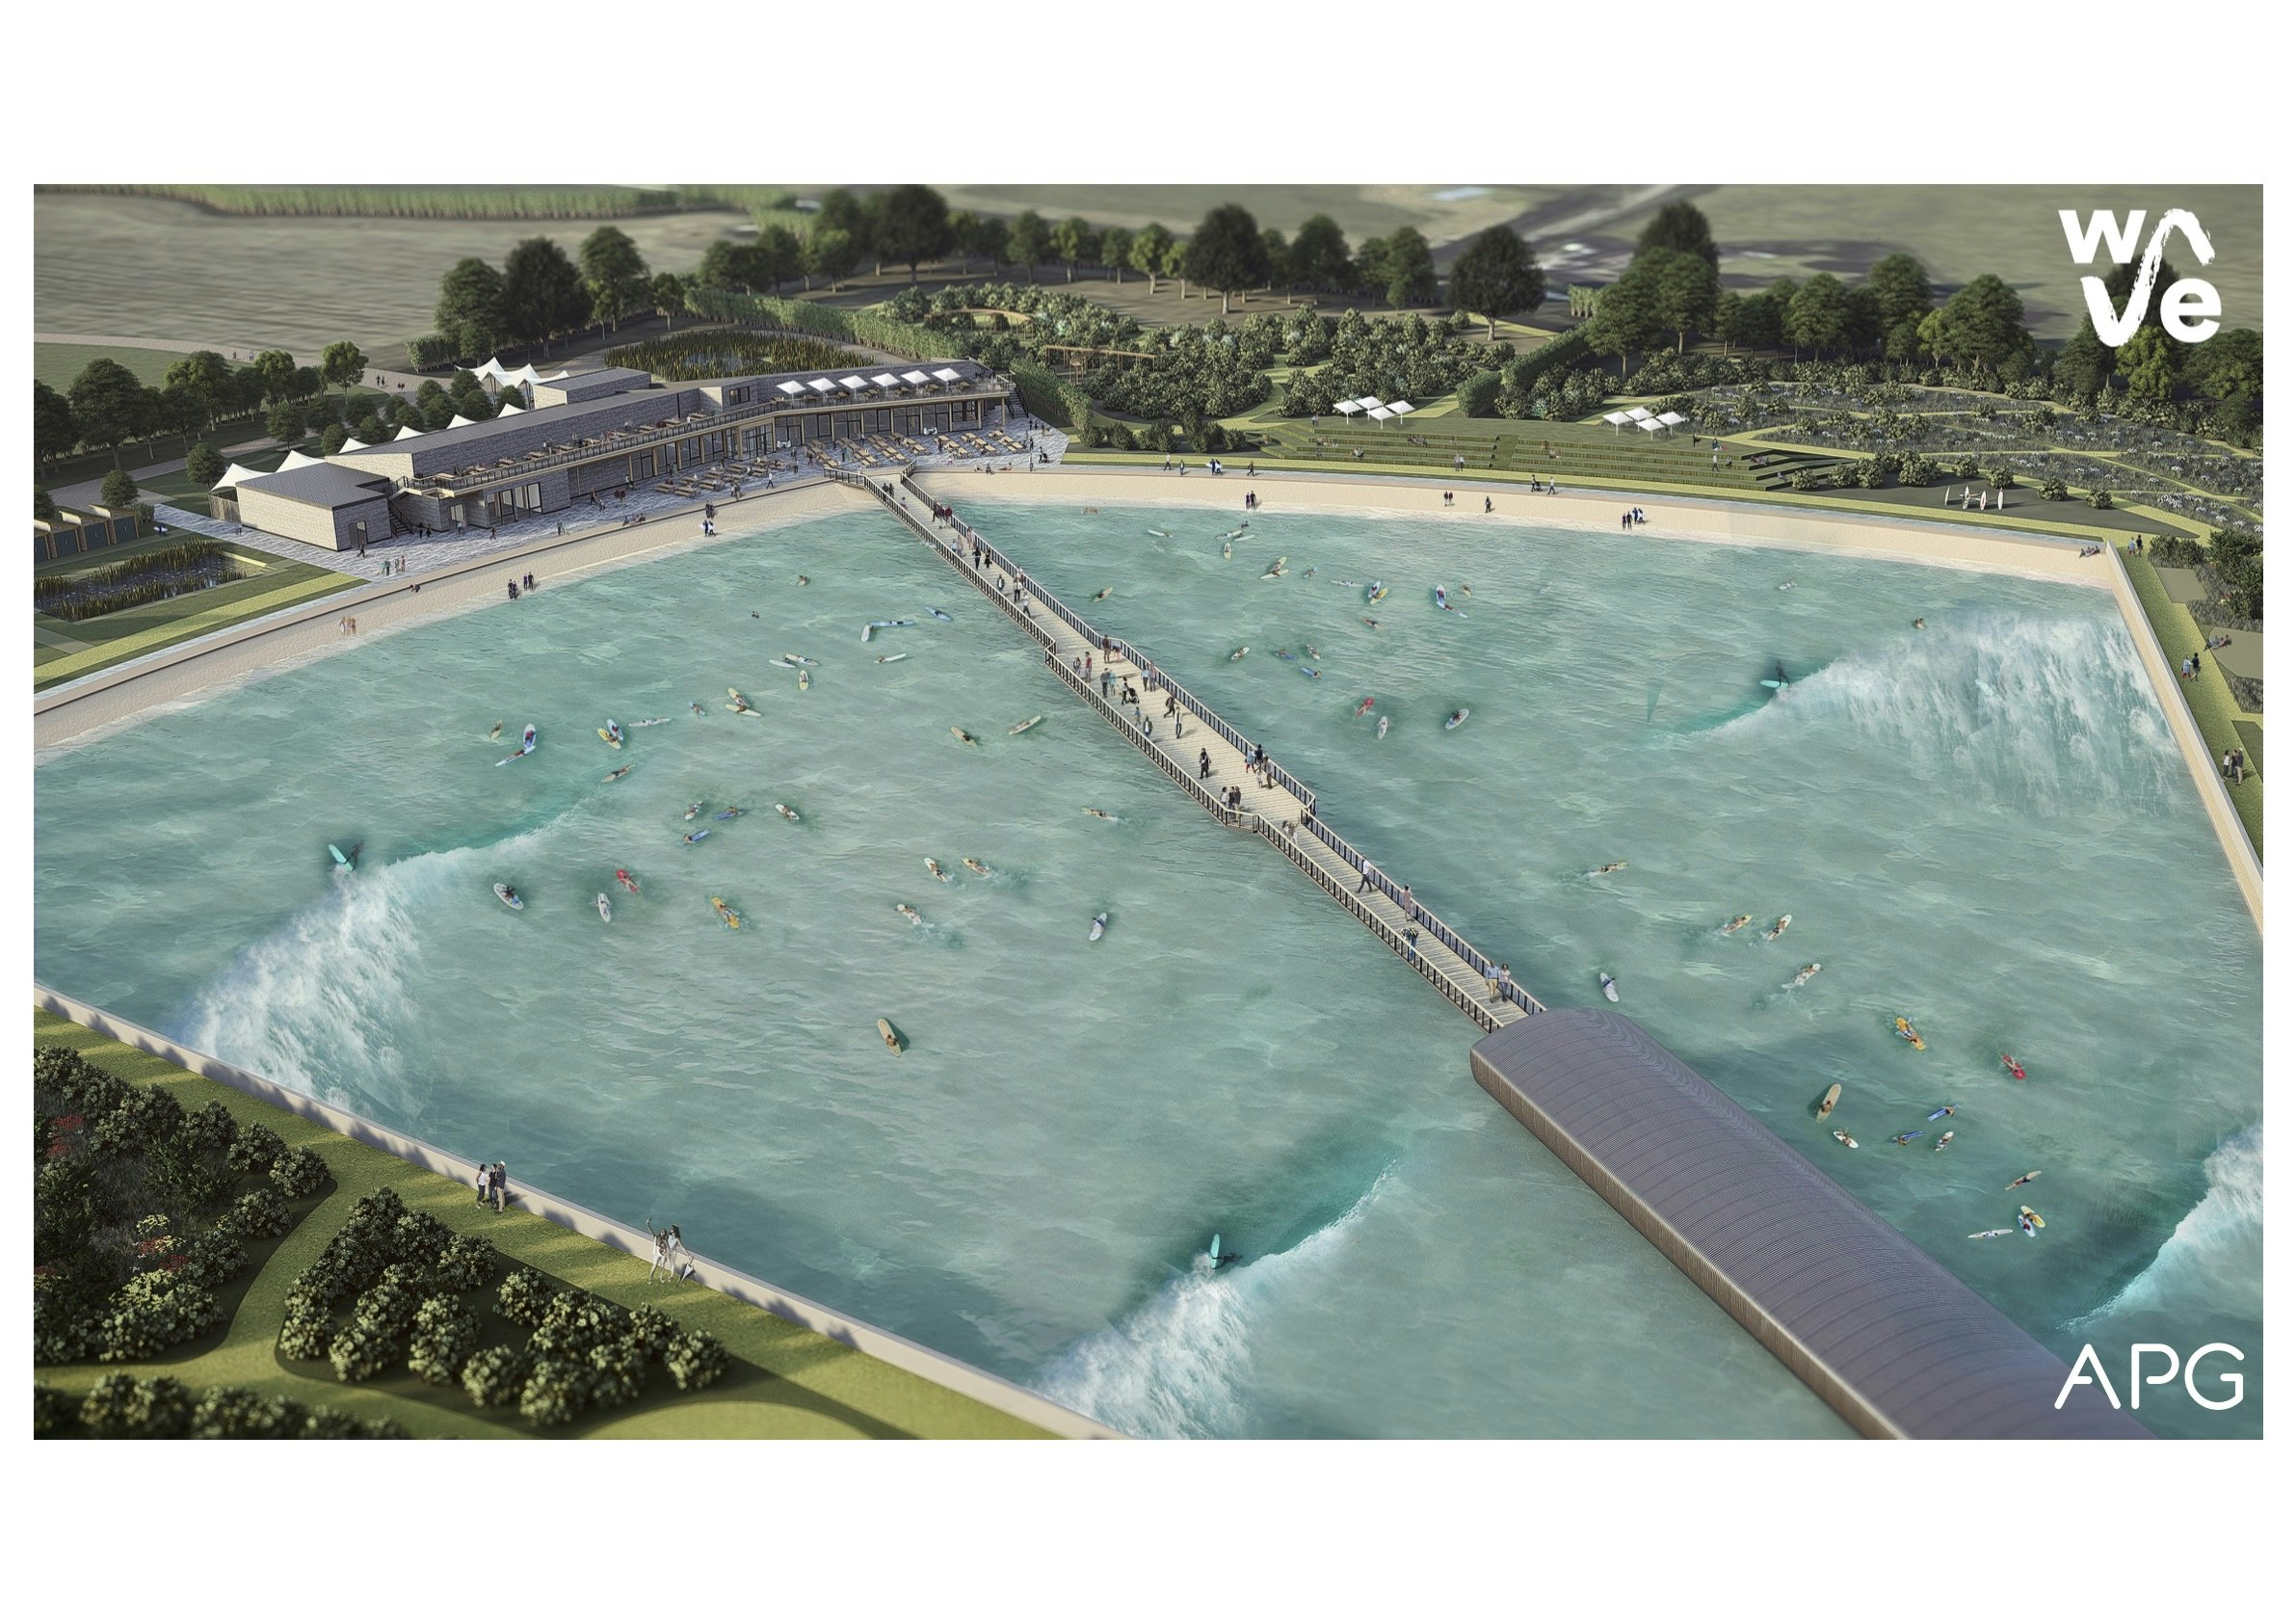 A rendering of an artificial lagoon and wooden clubhouse